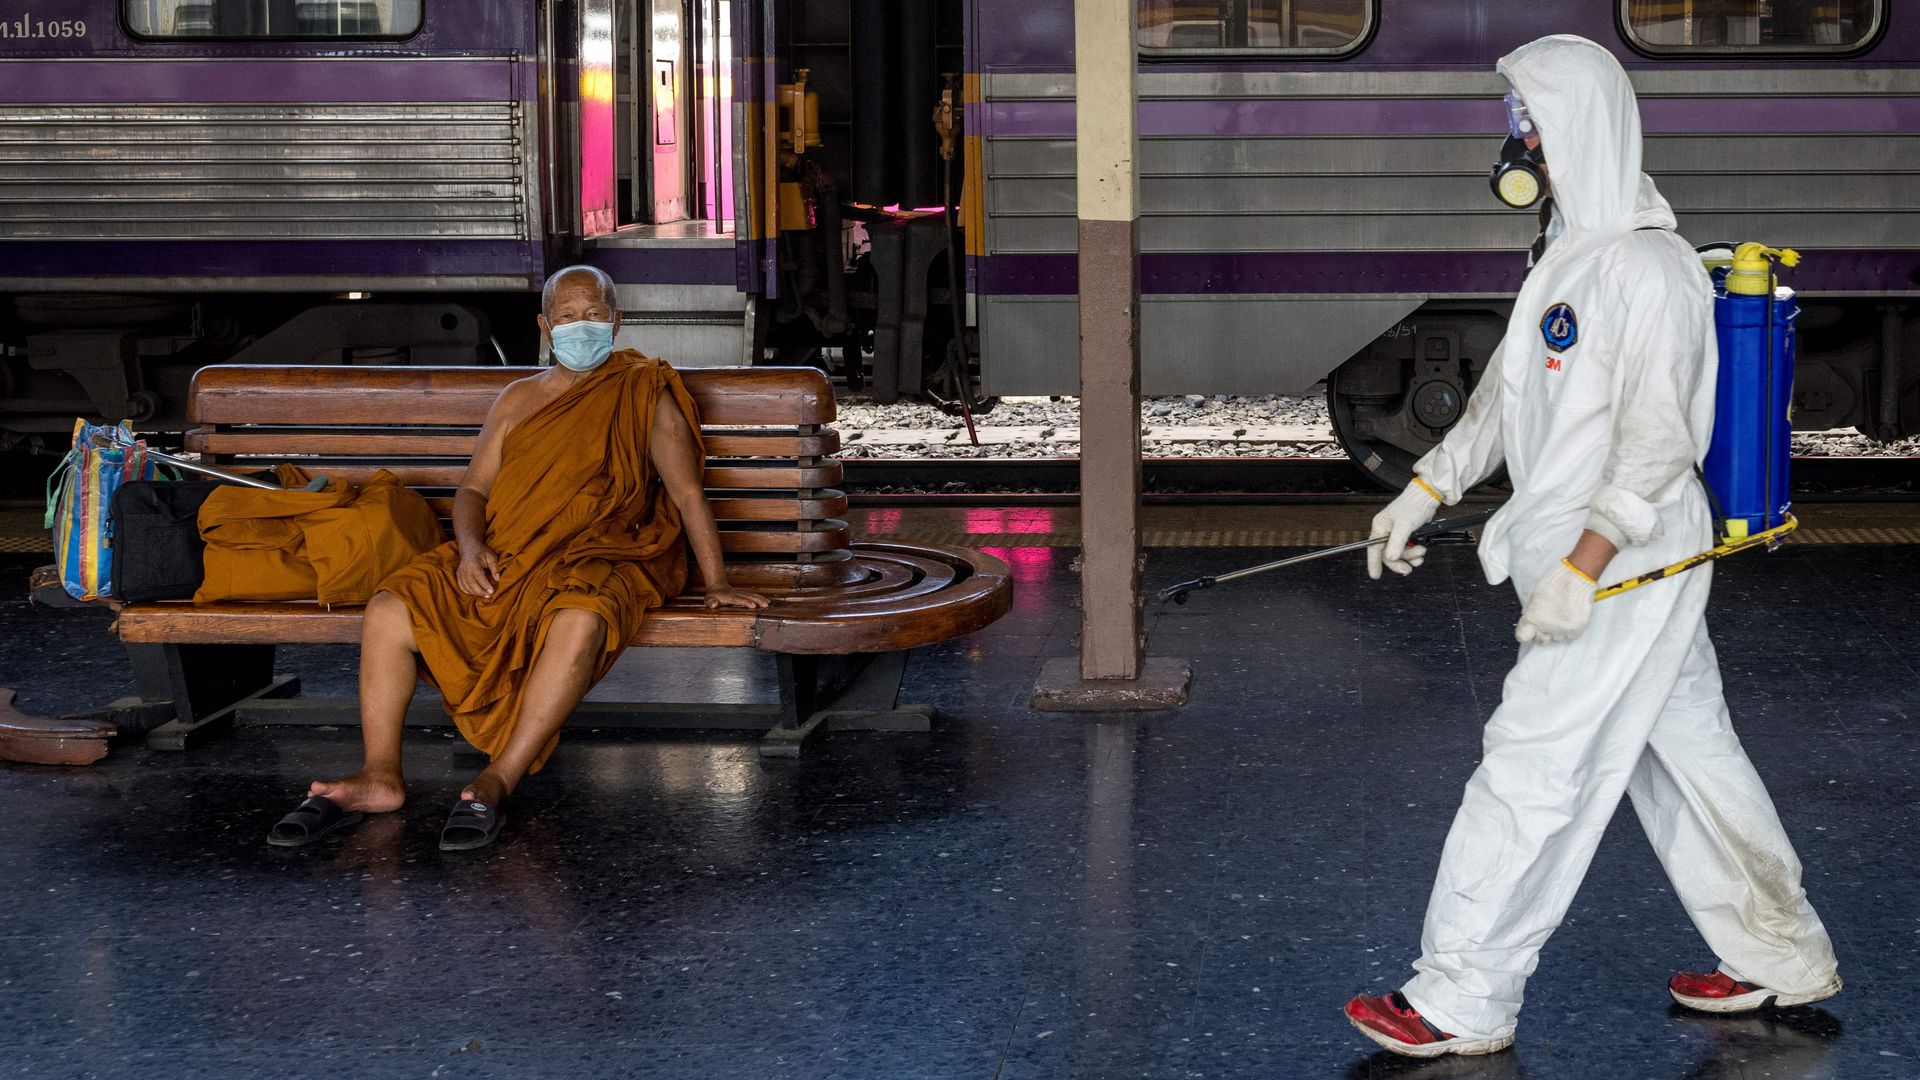 A cleaner wearing personal protective equipment (PPE) walks past a monk wearing a face mask at Hua Lamphong railway station in Bangkok on May 1